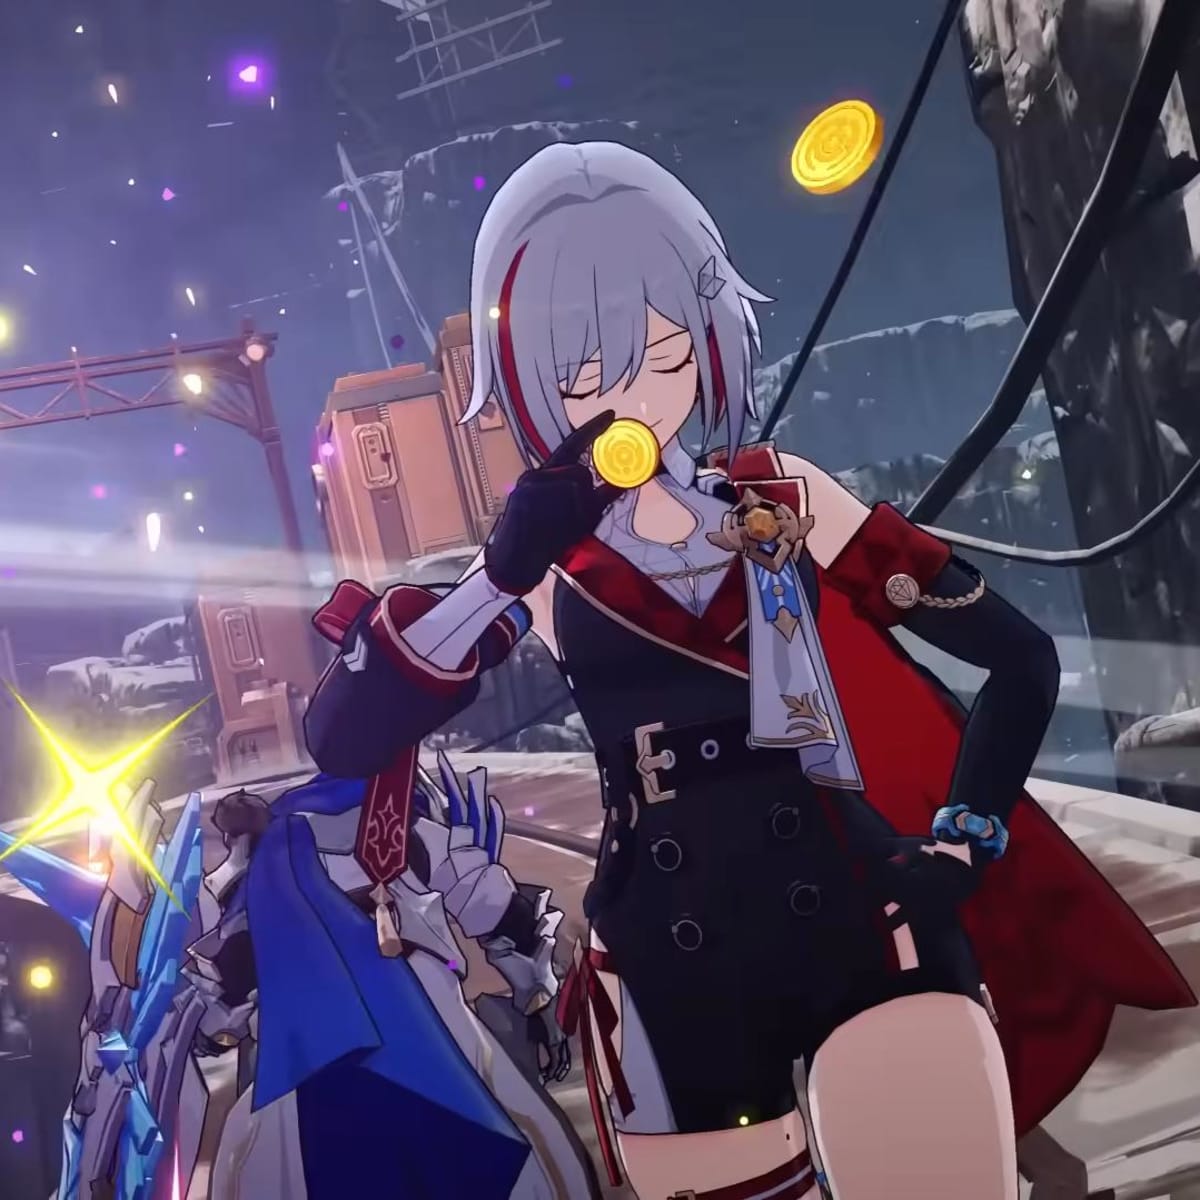 Honkai Star Rail 1.6 Redeem Codes: Active Codes and How to Redeem Them